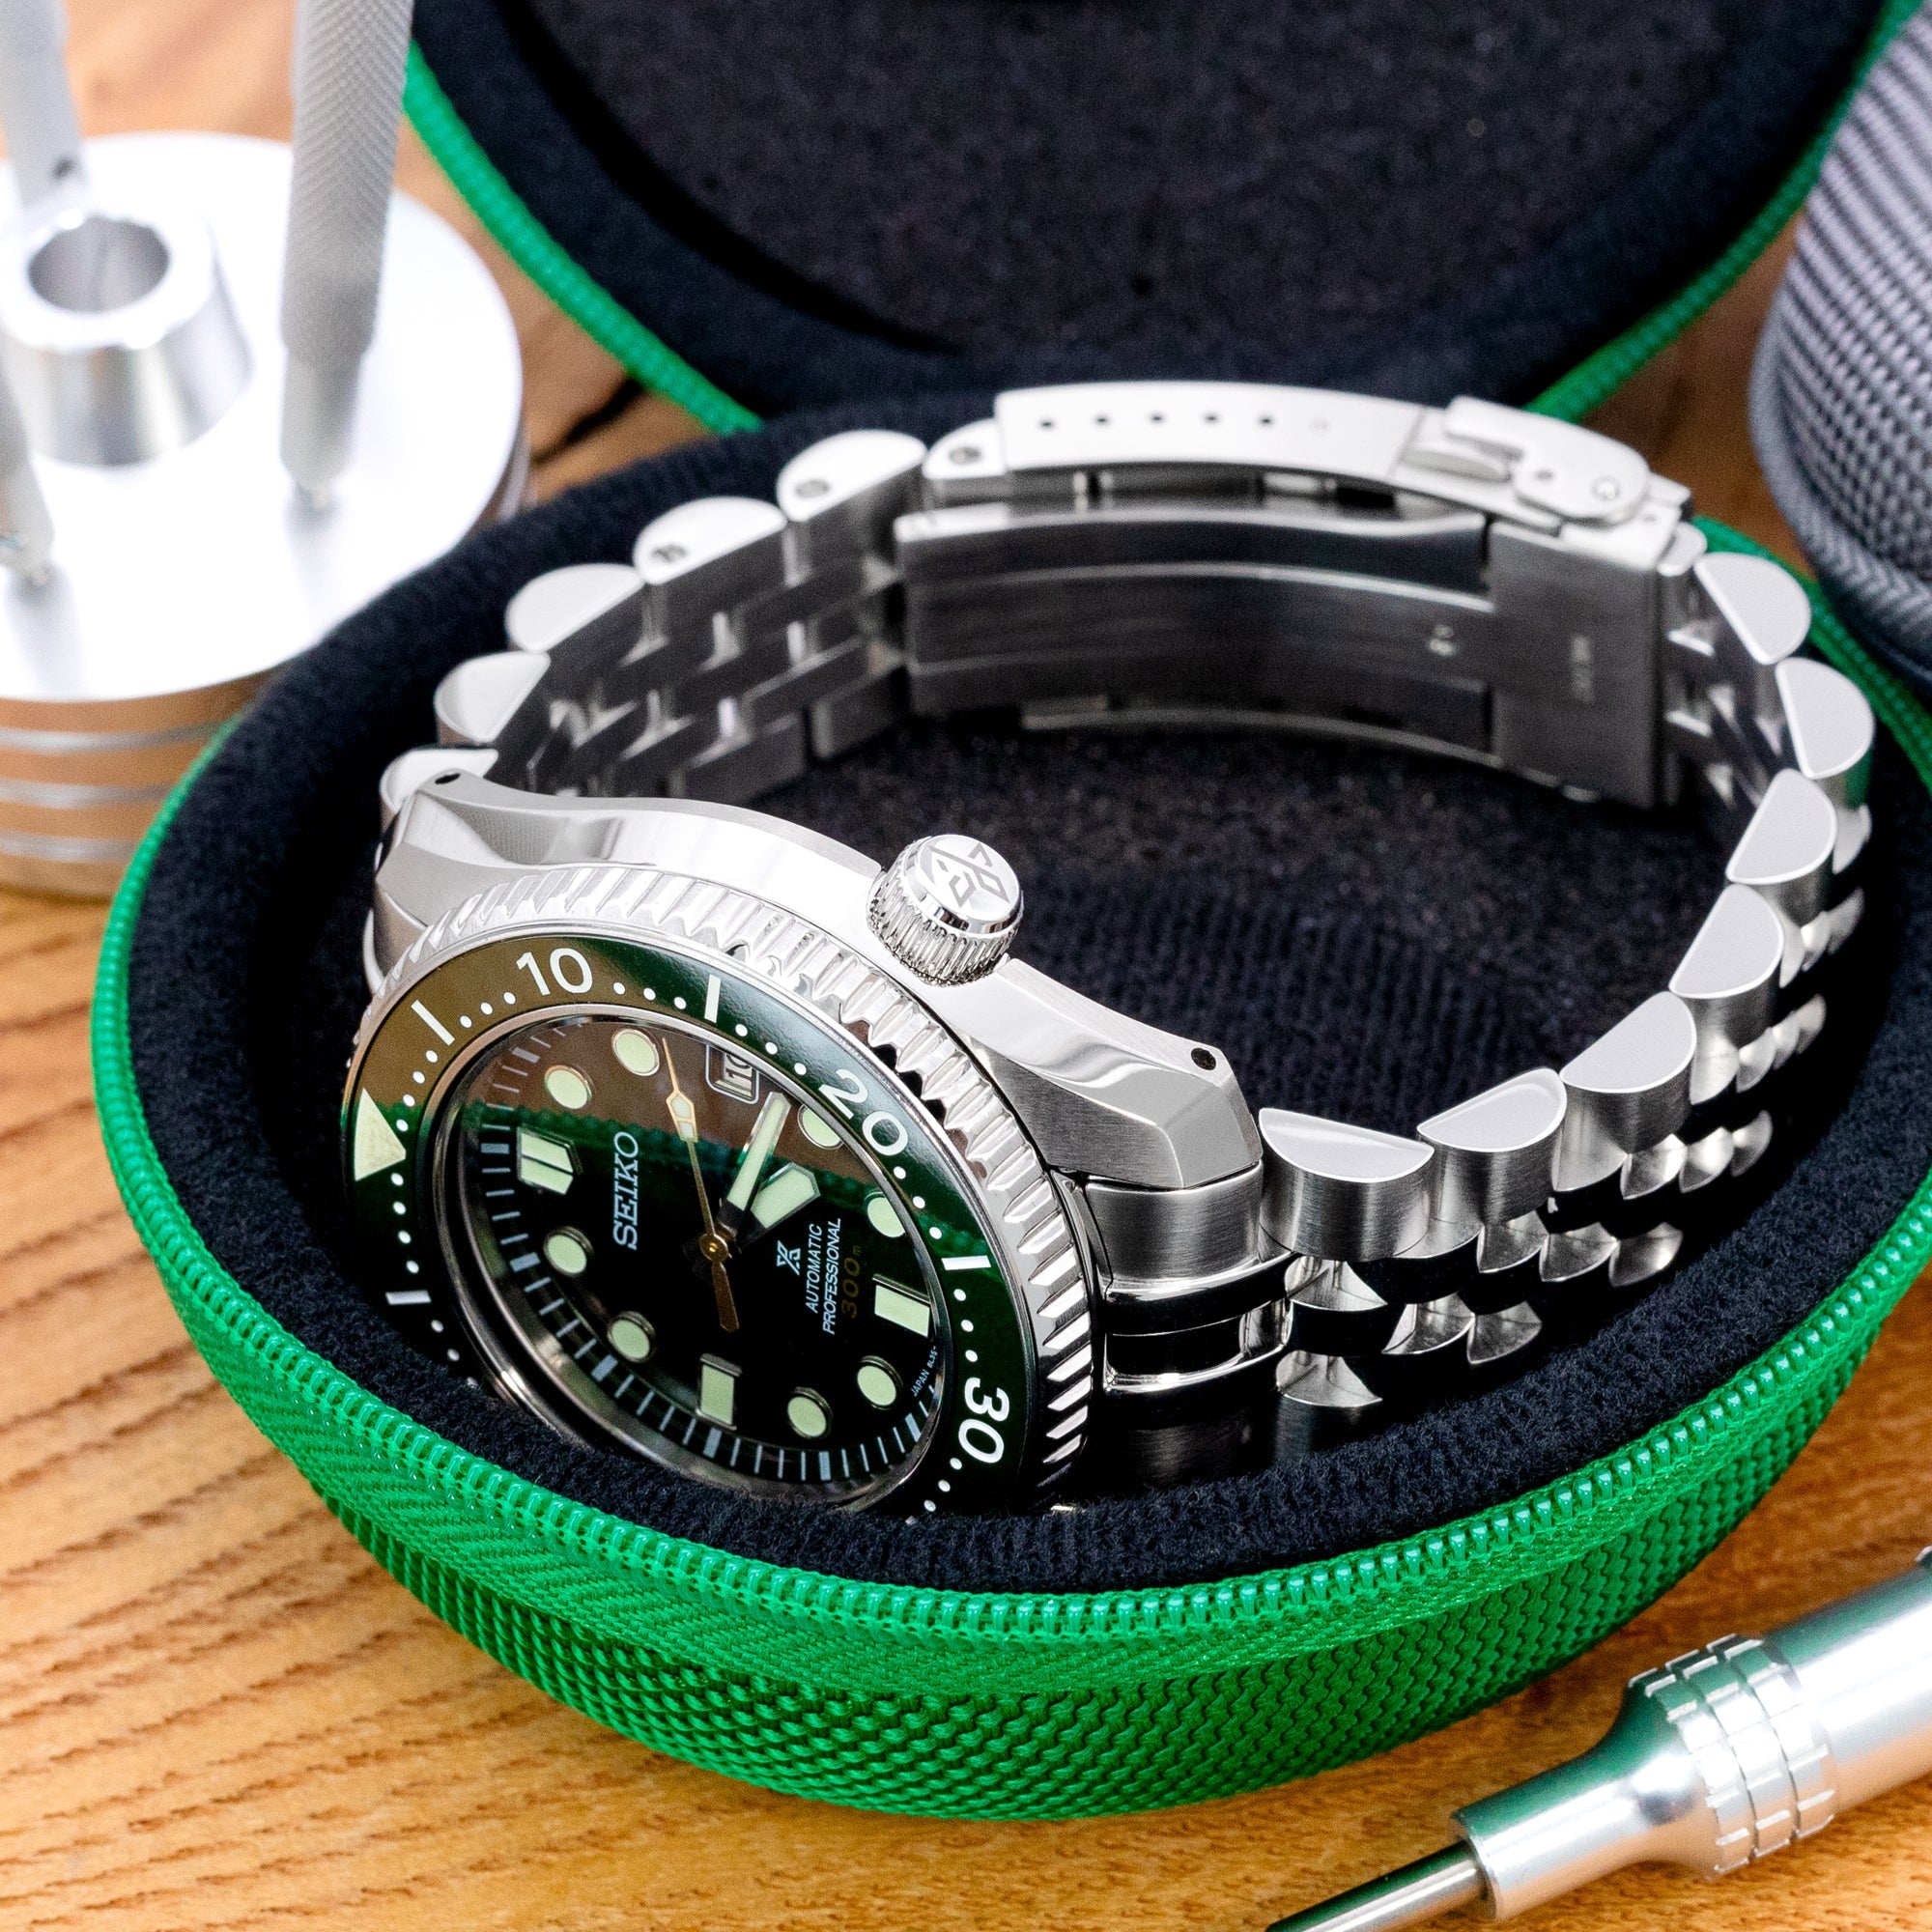 Round Watch Travel Hard Case Single Watch Box with Zipper, Green Strapcode Watch Bands